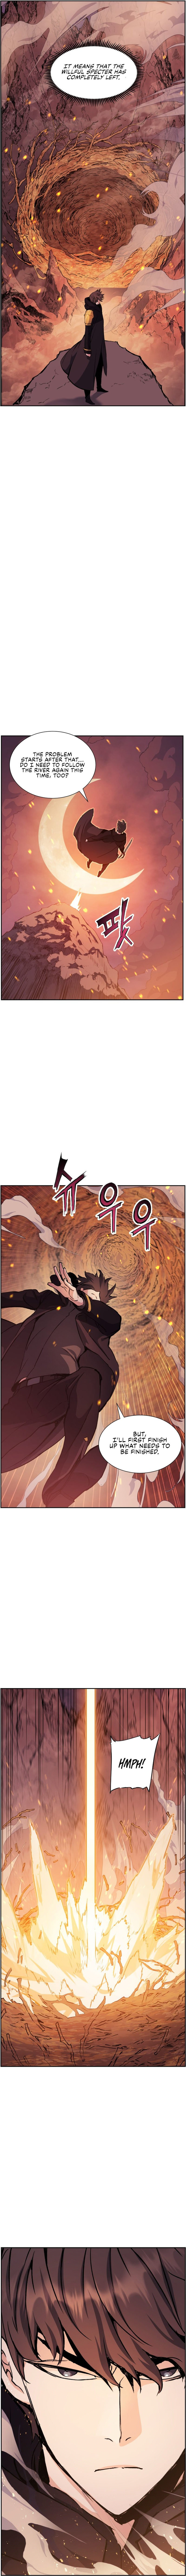 return-of-the-shattered-constellation-chap-35-6